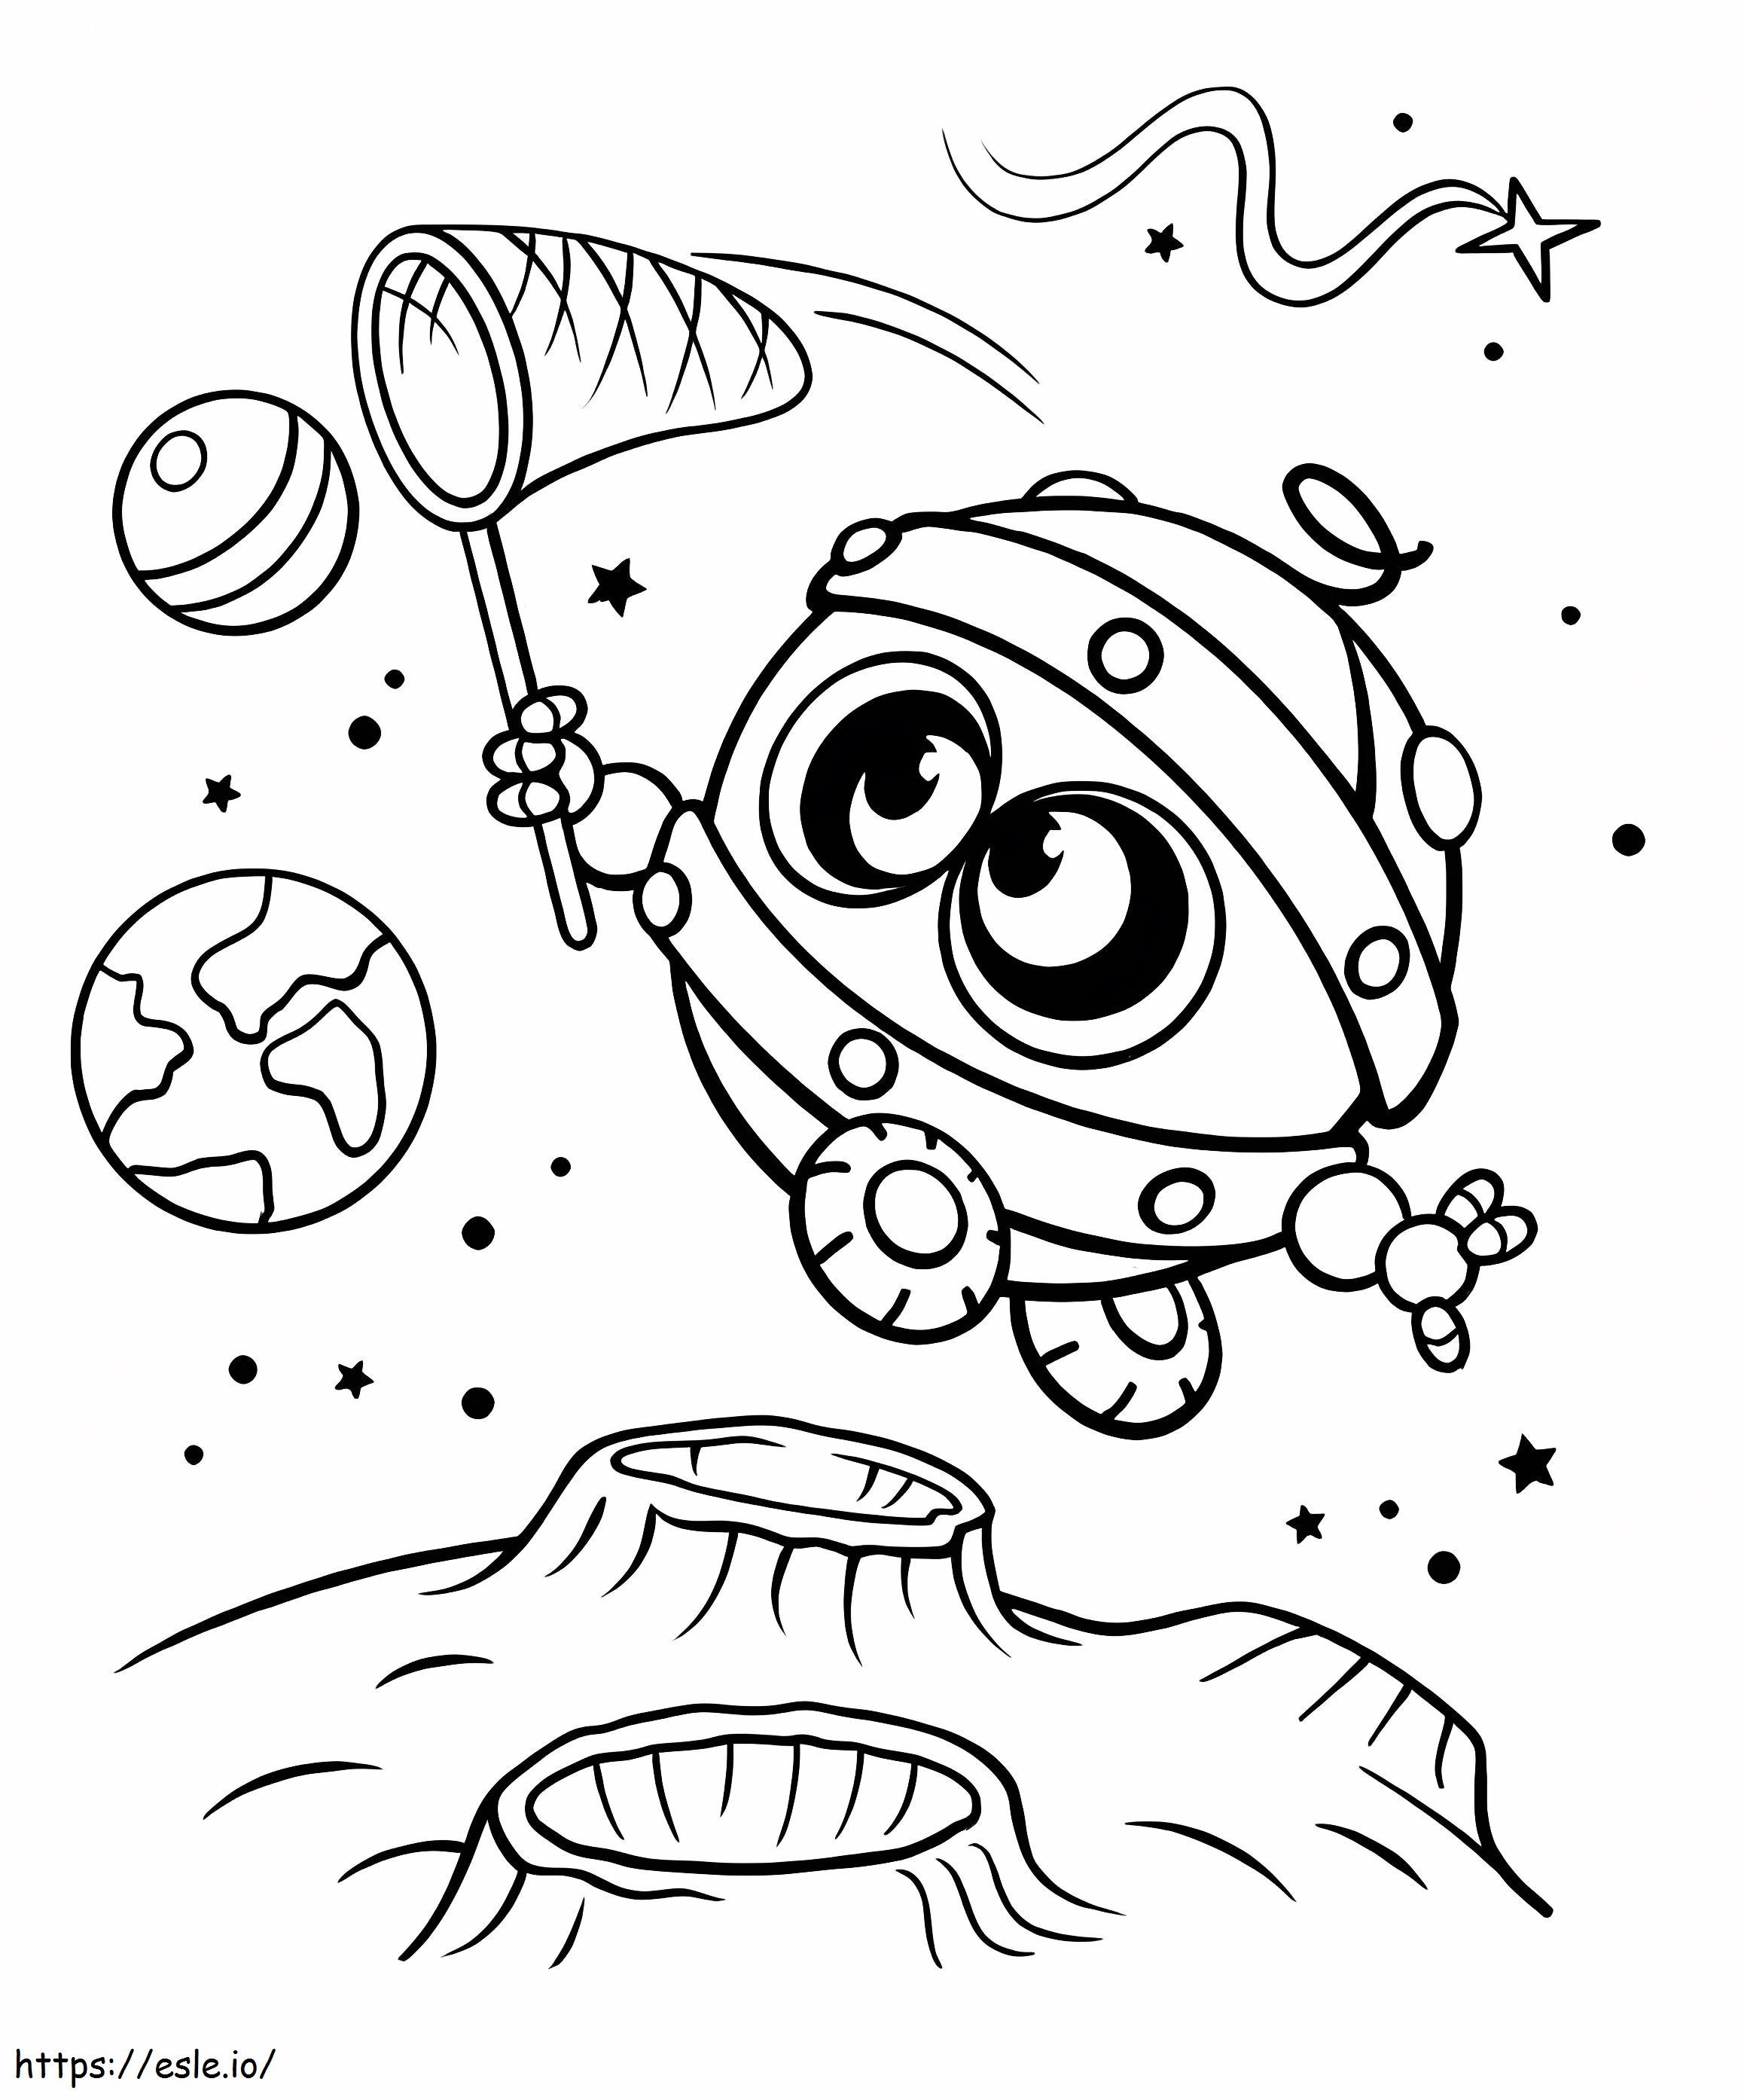 Catch The Planet coloring page